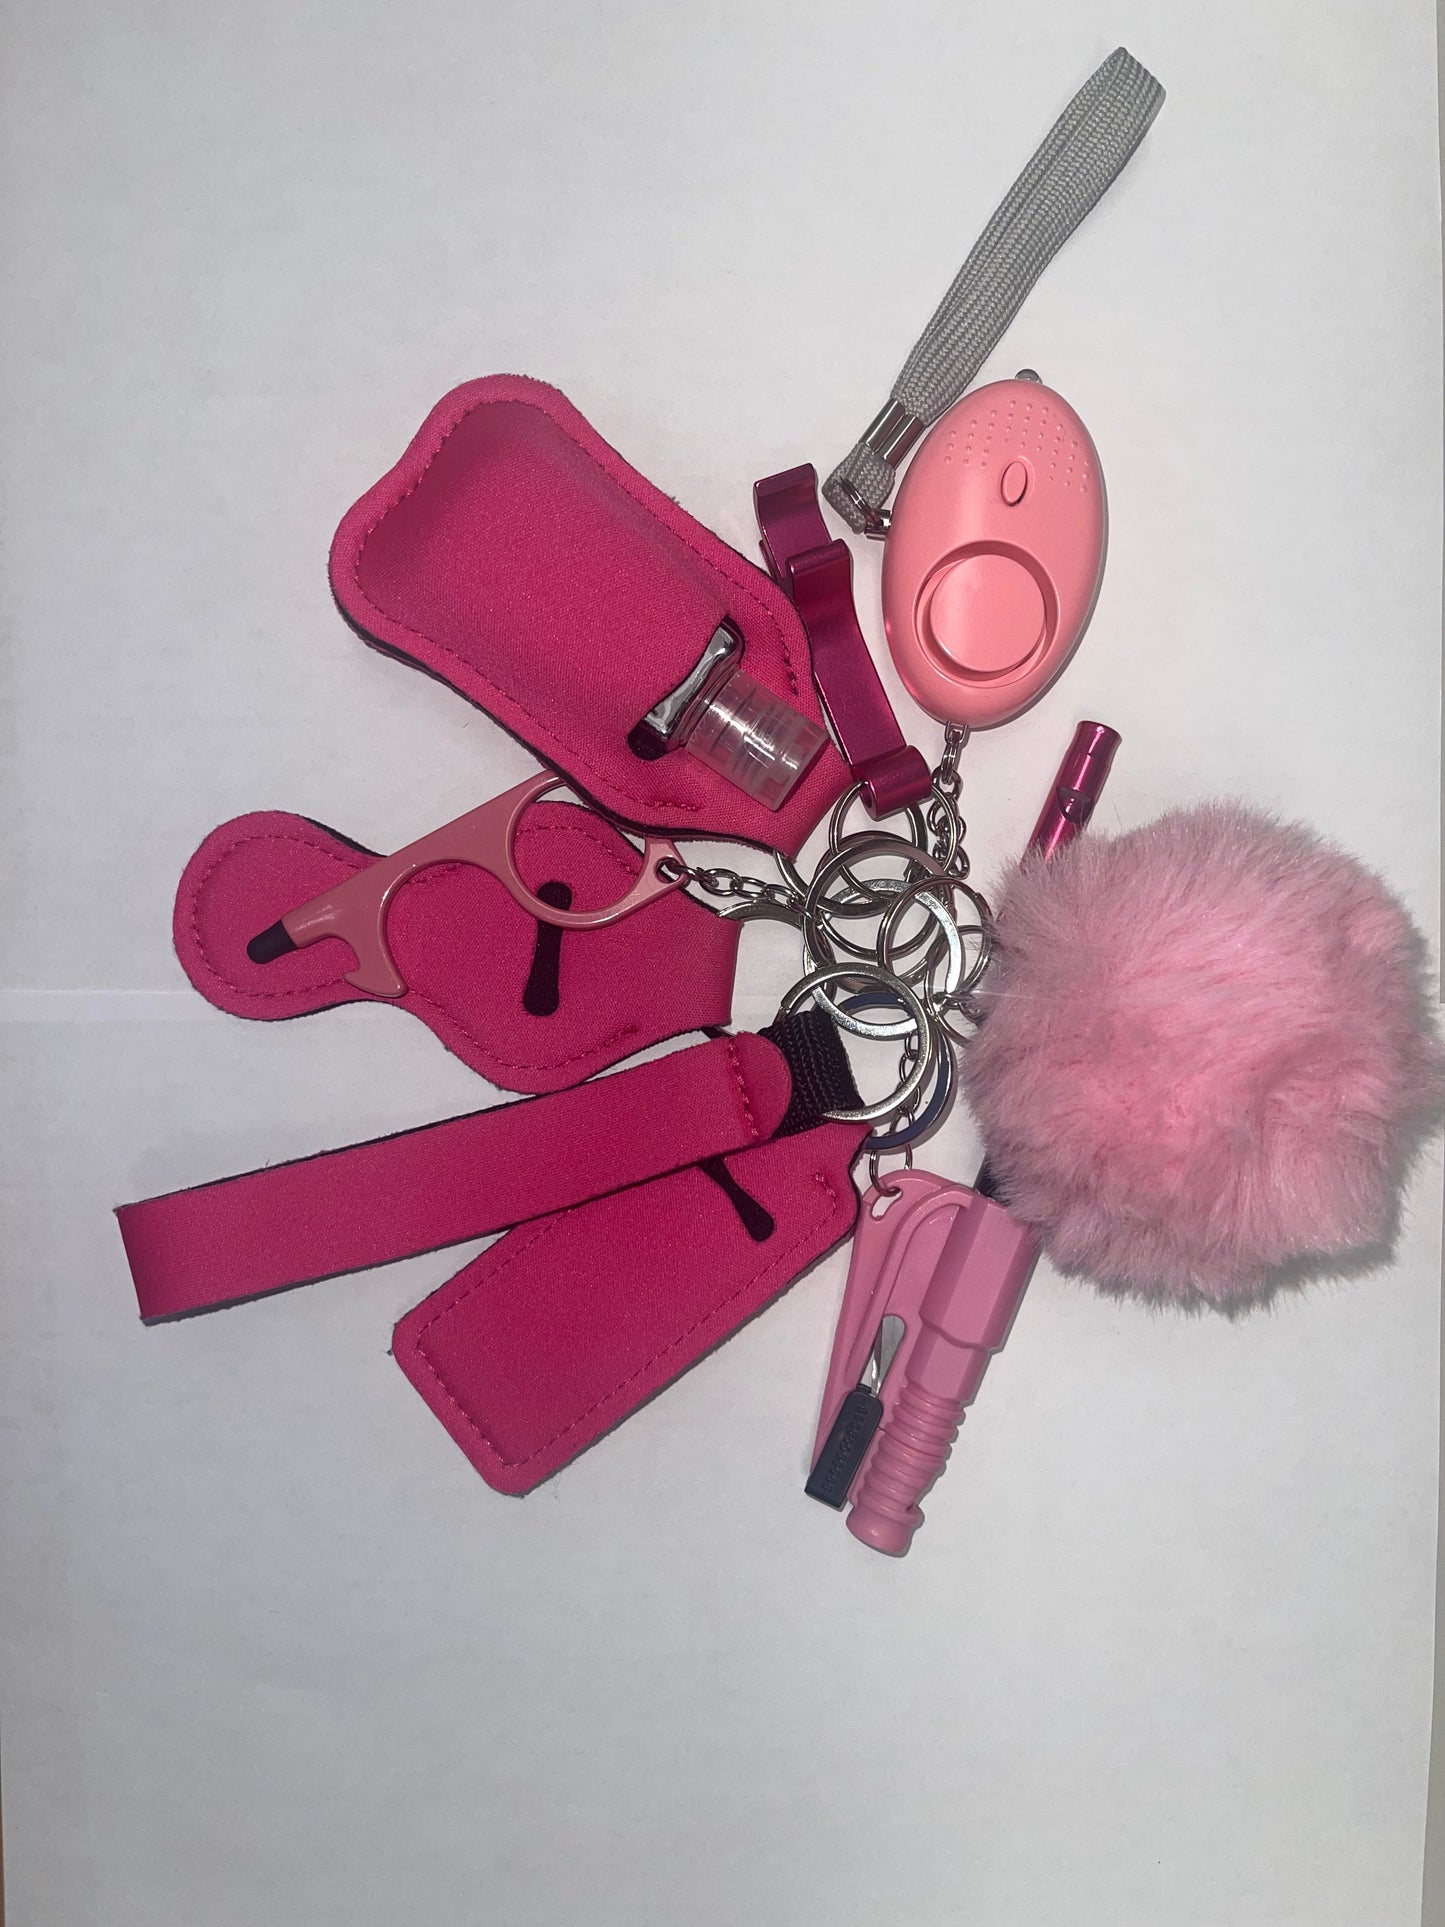 11-piece Personal Safety/ Protection Keychain